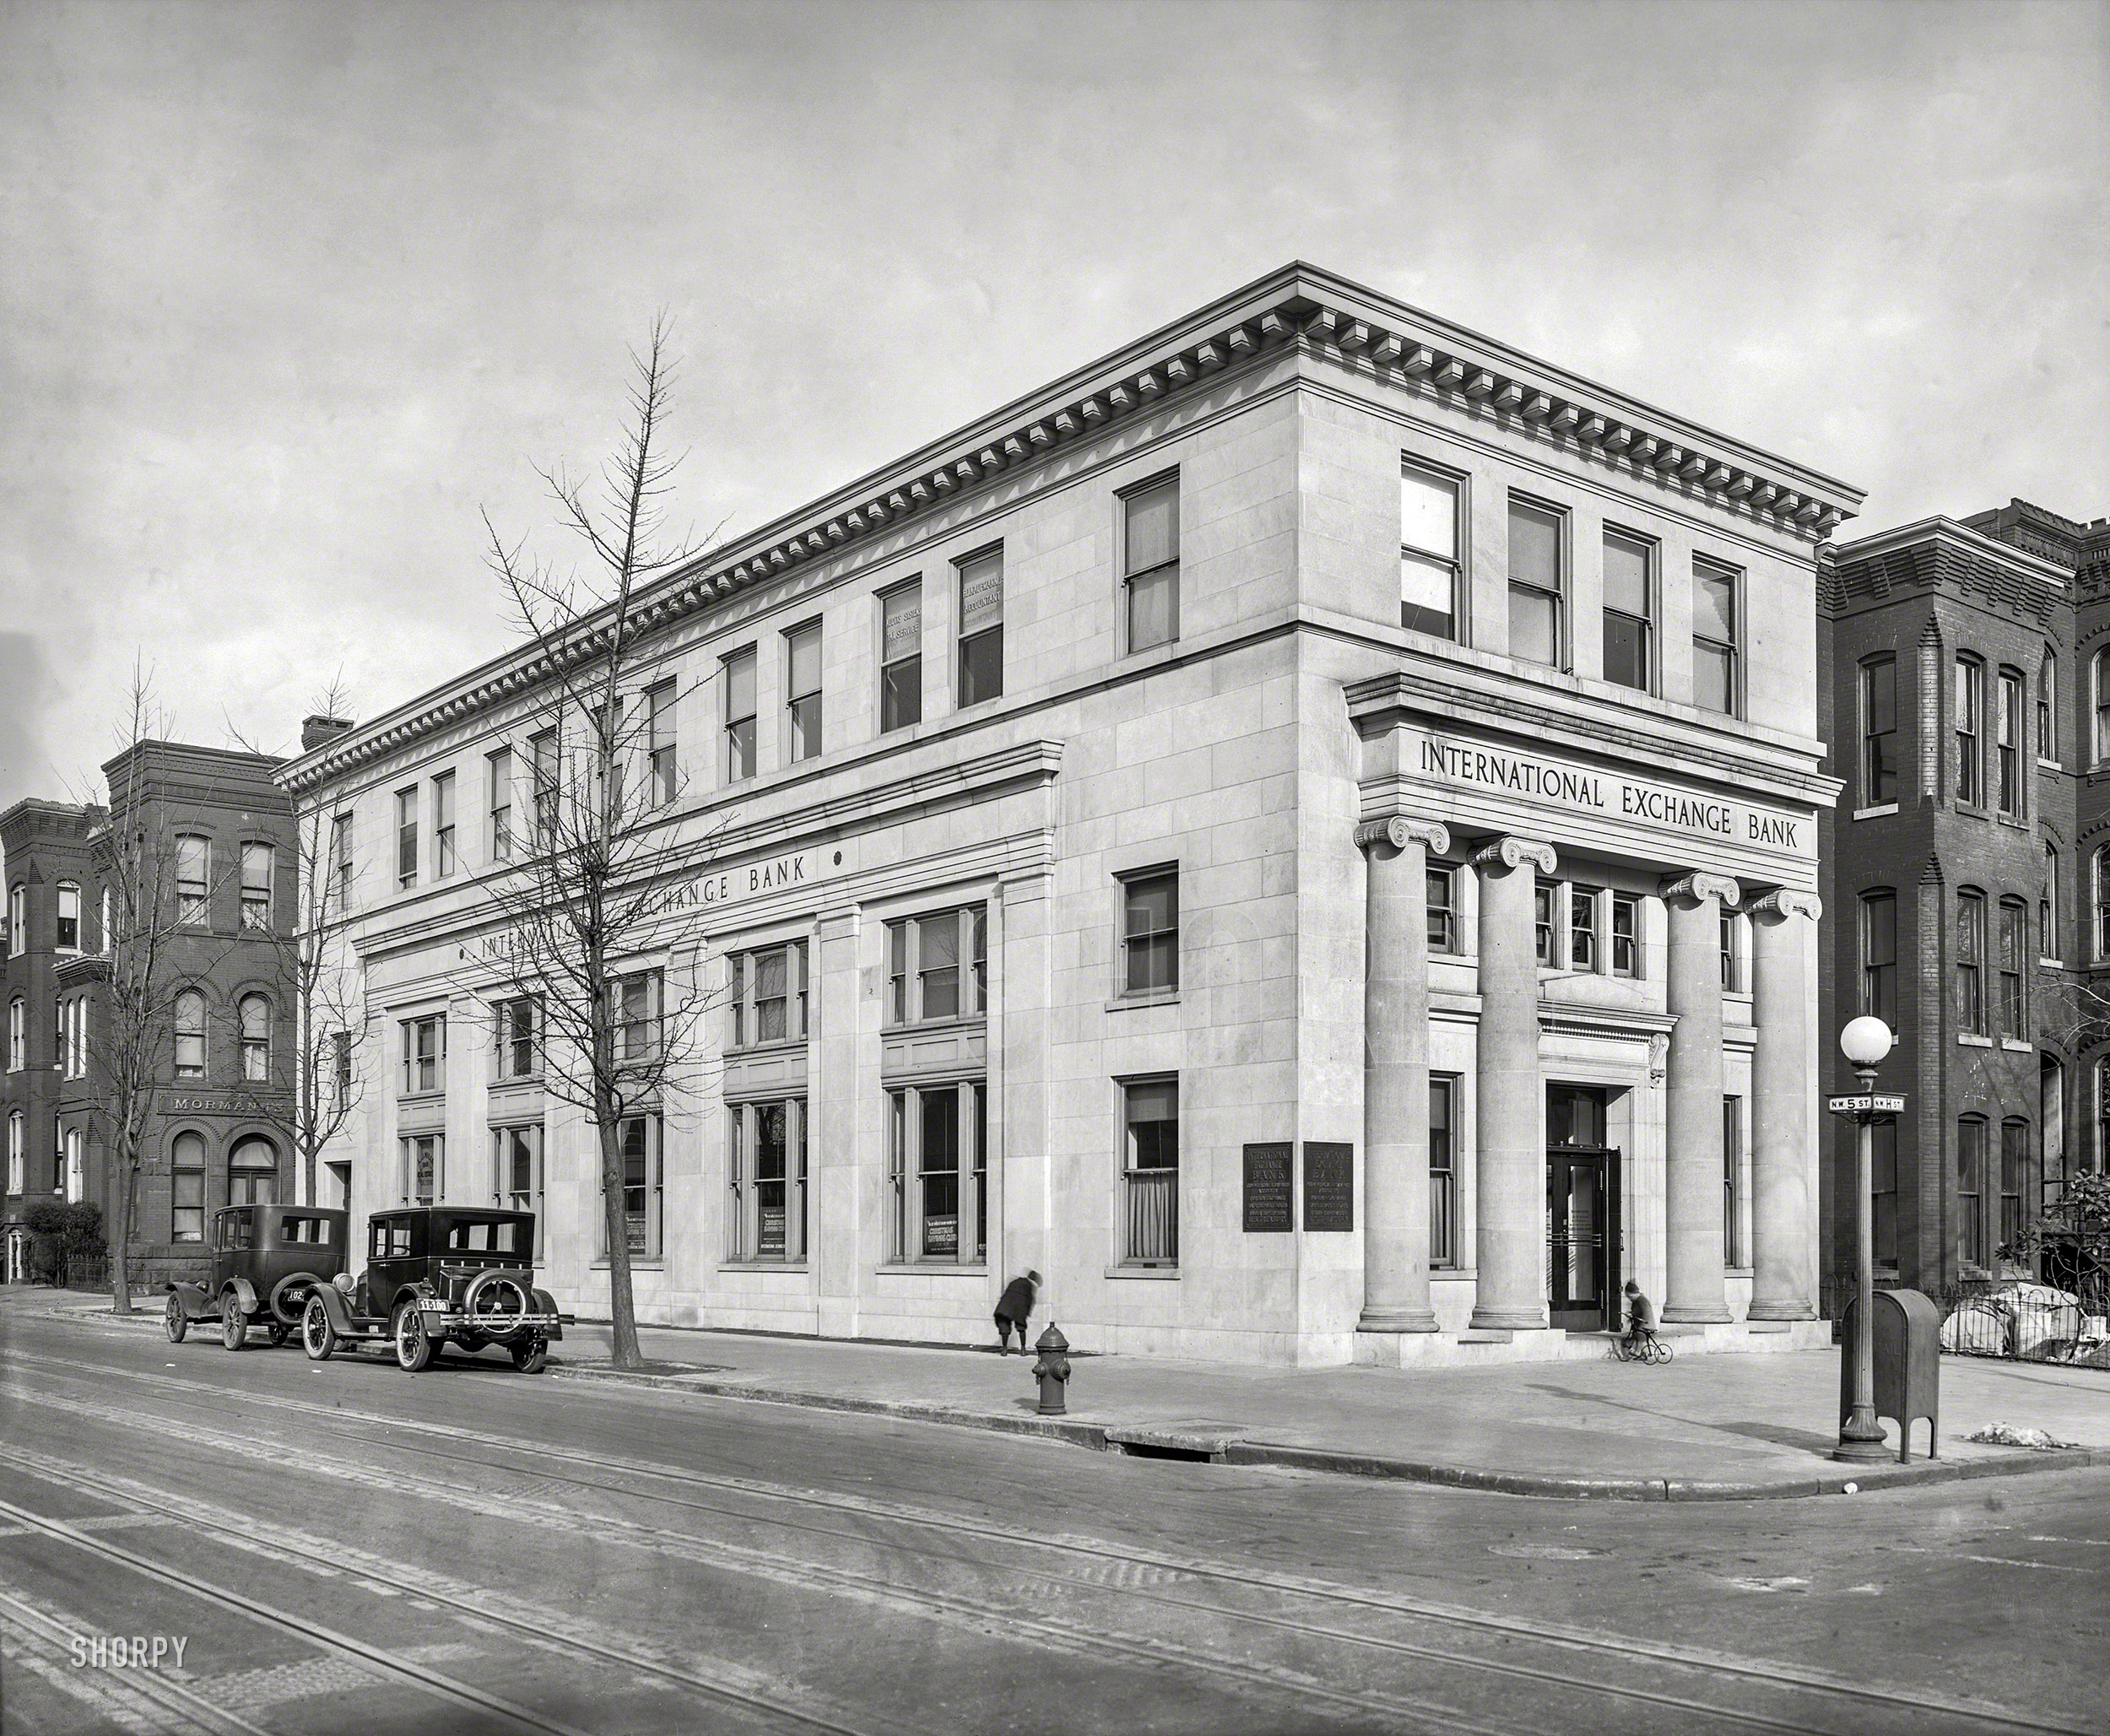 Washington, D.C., circa 1925. "International Exchange Bank, Fifth and H Streets N.W." National Photo Company Collection glass negative. View full size.